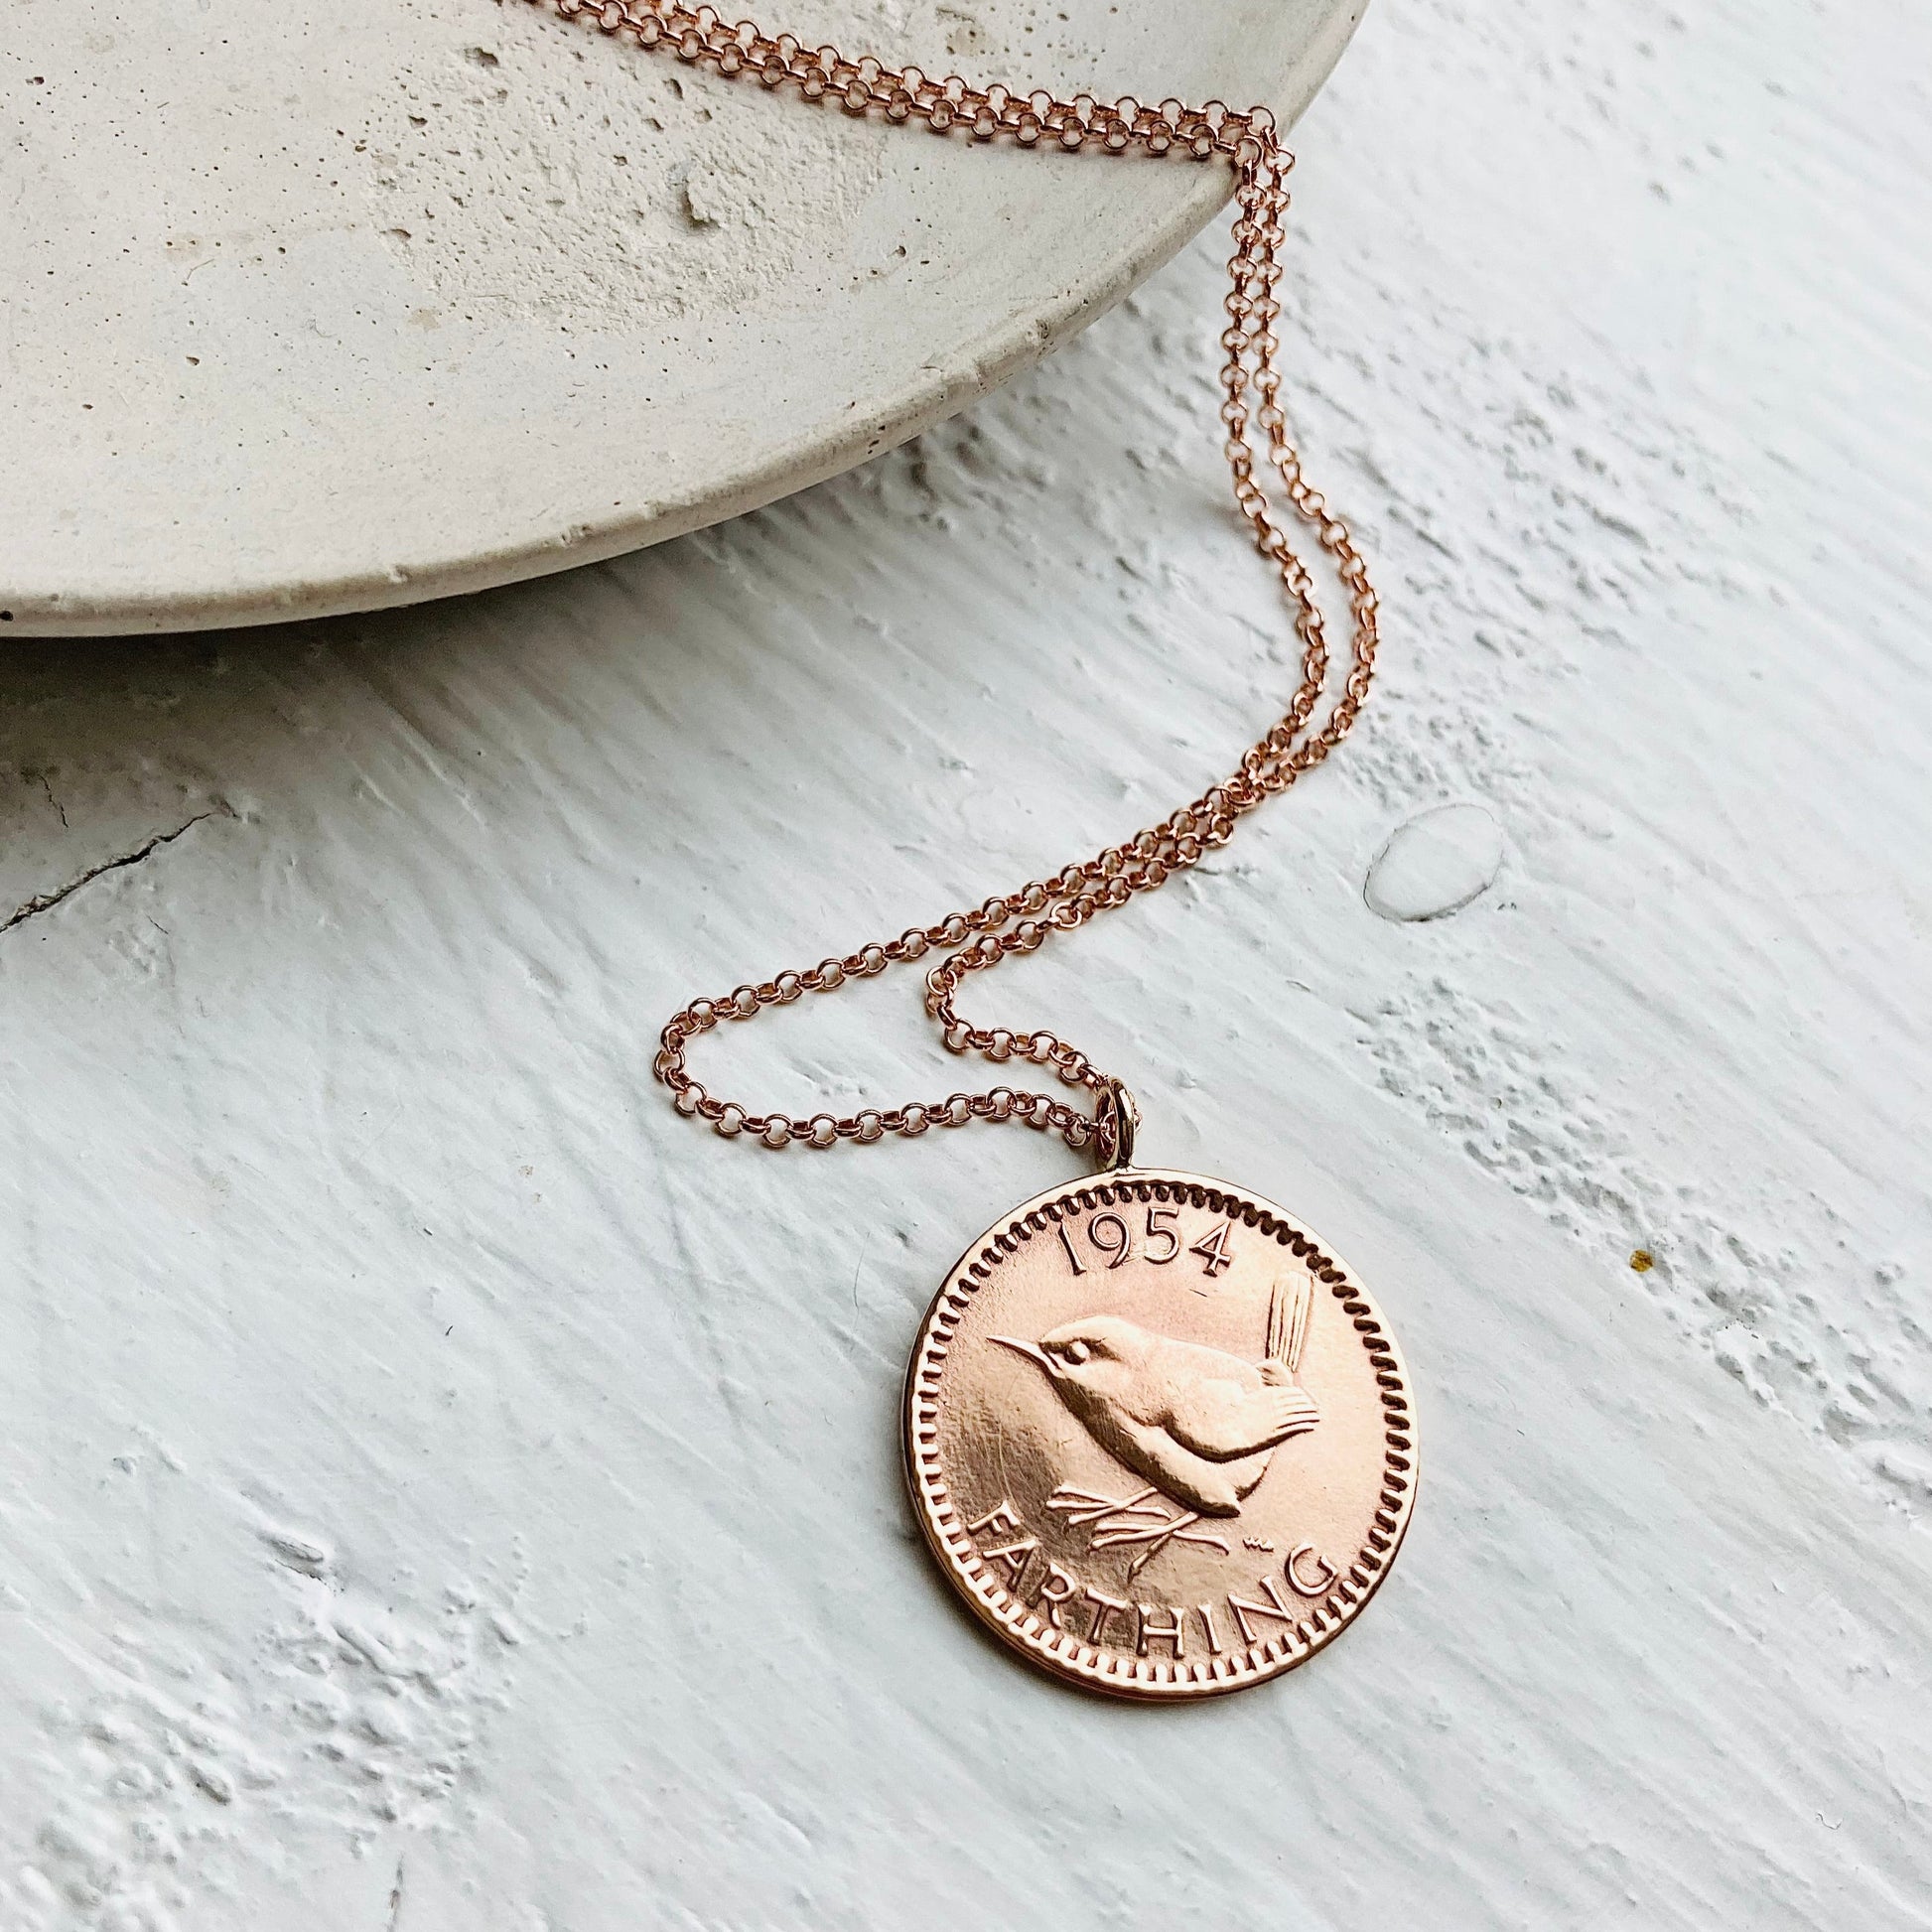 70th birthday gift, 1954 dated wren British farthing coin necklace made by Prenoa on a rose gold chain